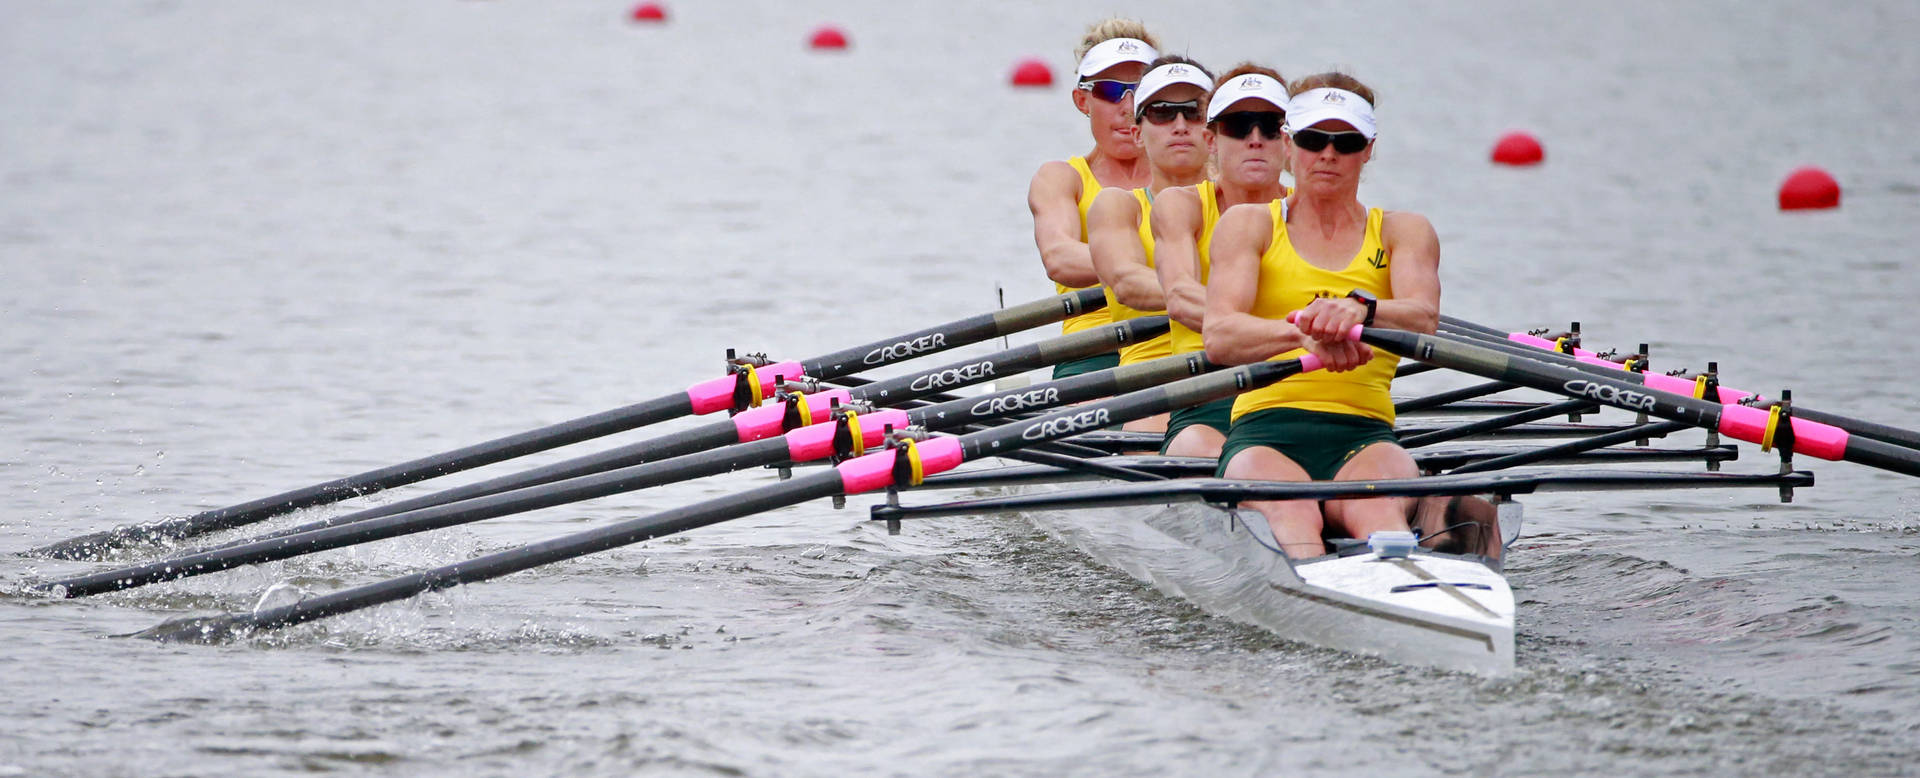 Women's Championship Rowing Team in Action Wallpaper